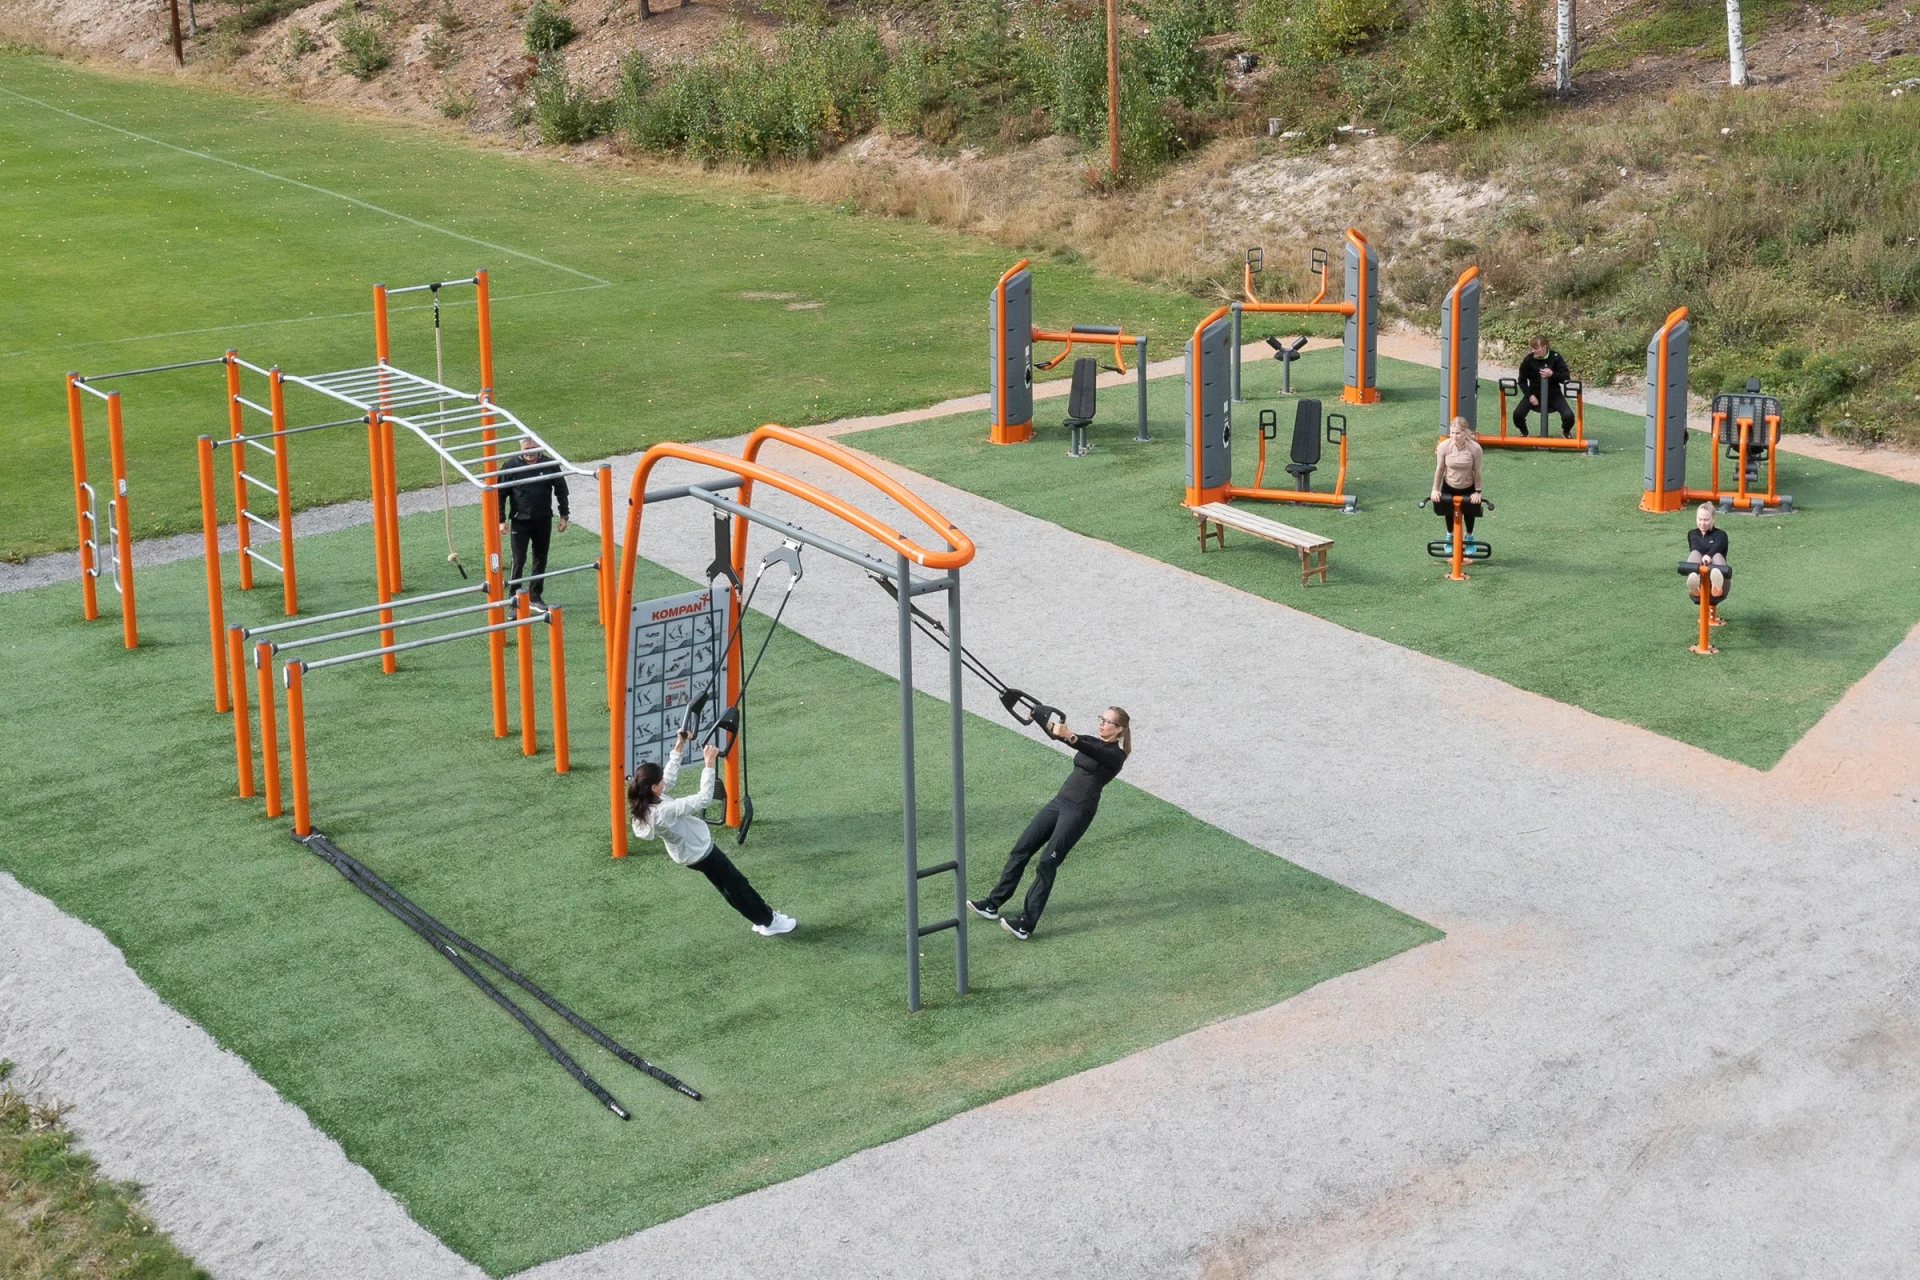 outdoor fitness site for different users. Strength and street working equipment